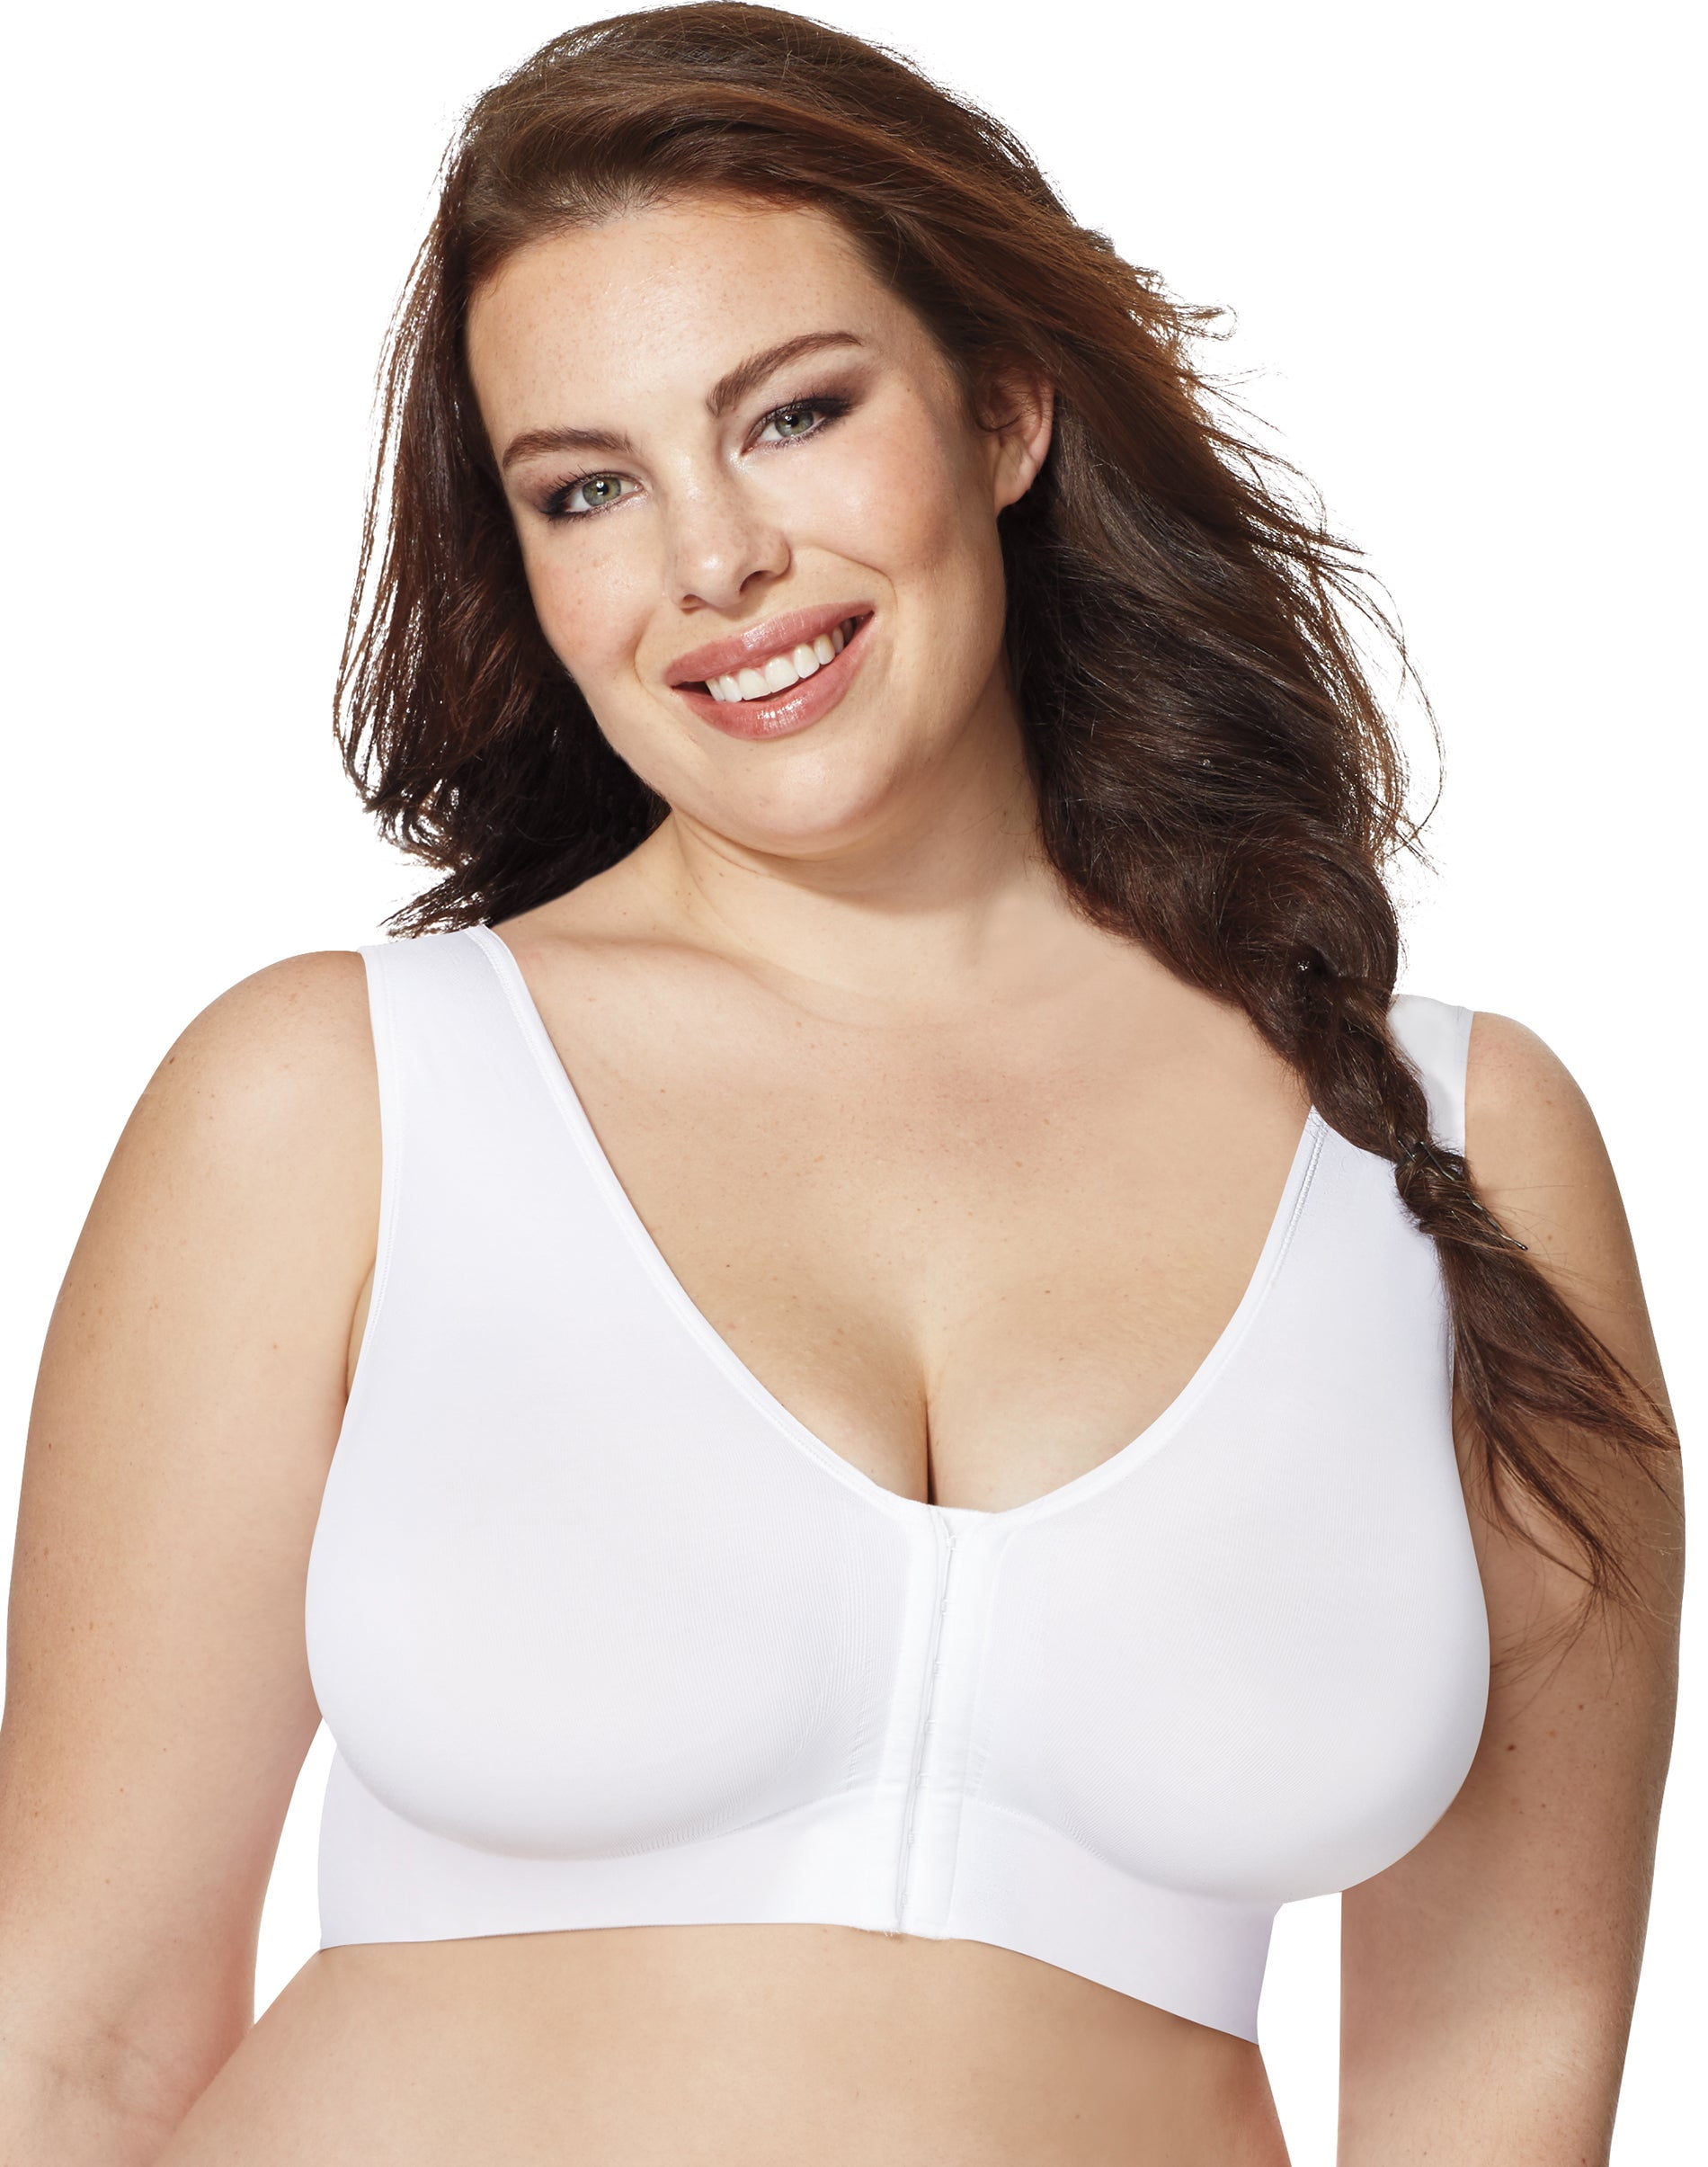 052X03 Just My Size 1107 Front Close Wirefree Bra 42B White NWOT